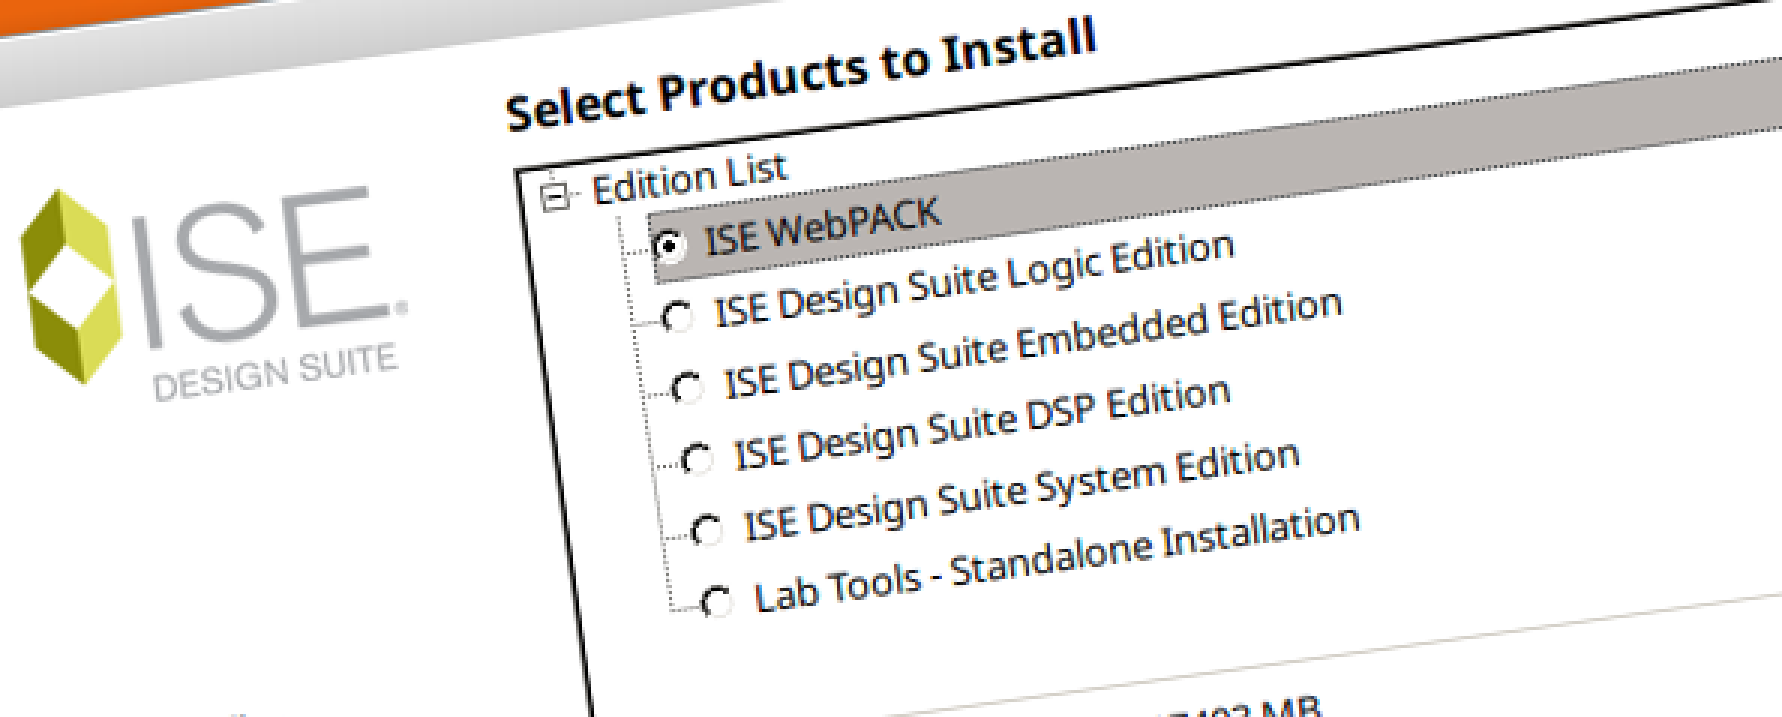 Setting Up a Complete Xilinx ISE 14.7 Development Environment